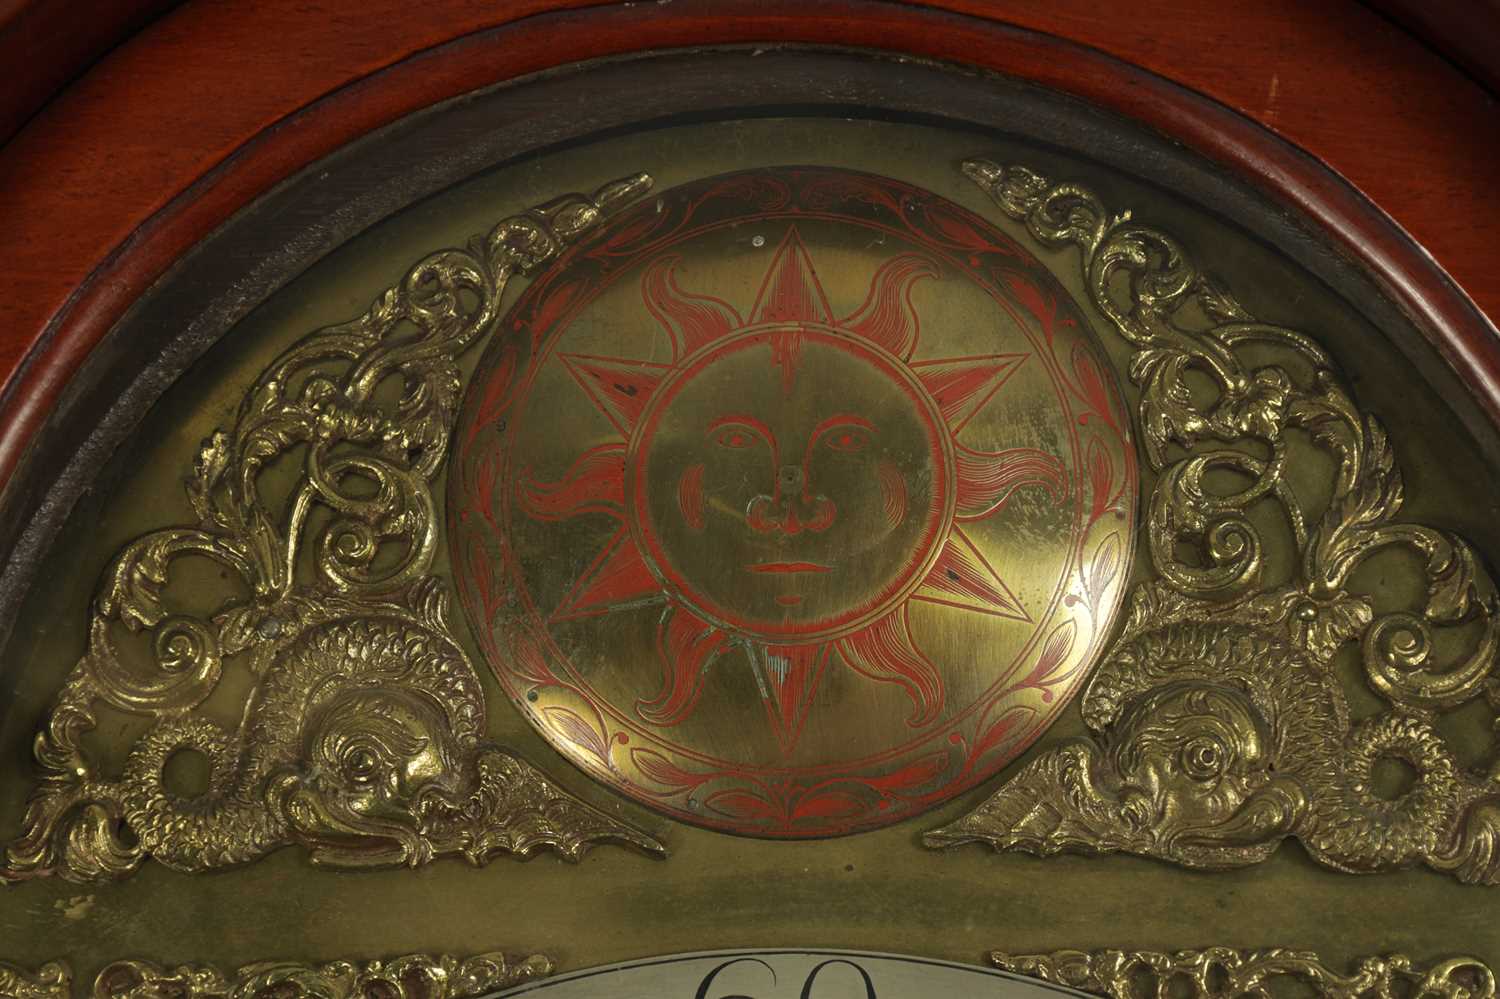 R. HENDERSON, SCARBROUGH. A MID 18TH CENTURY FIGURED MAHOGANY LONGCASE CLOCK - Image 3 of 8